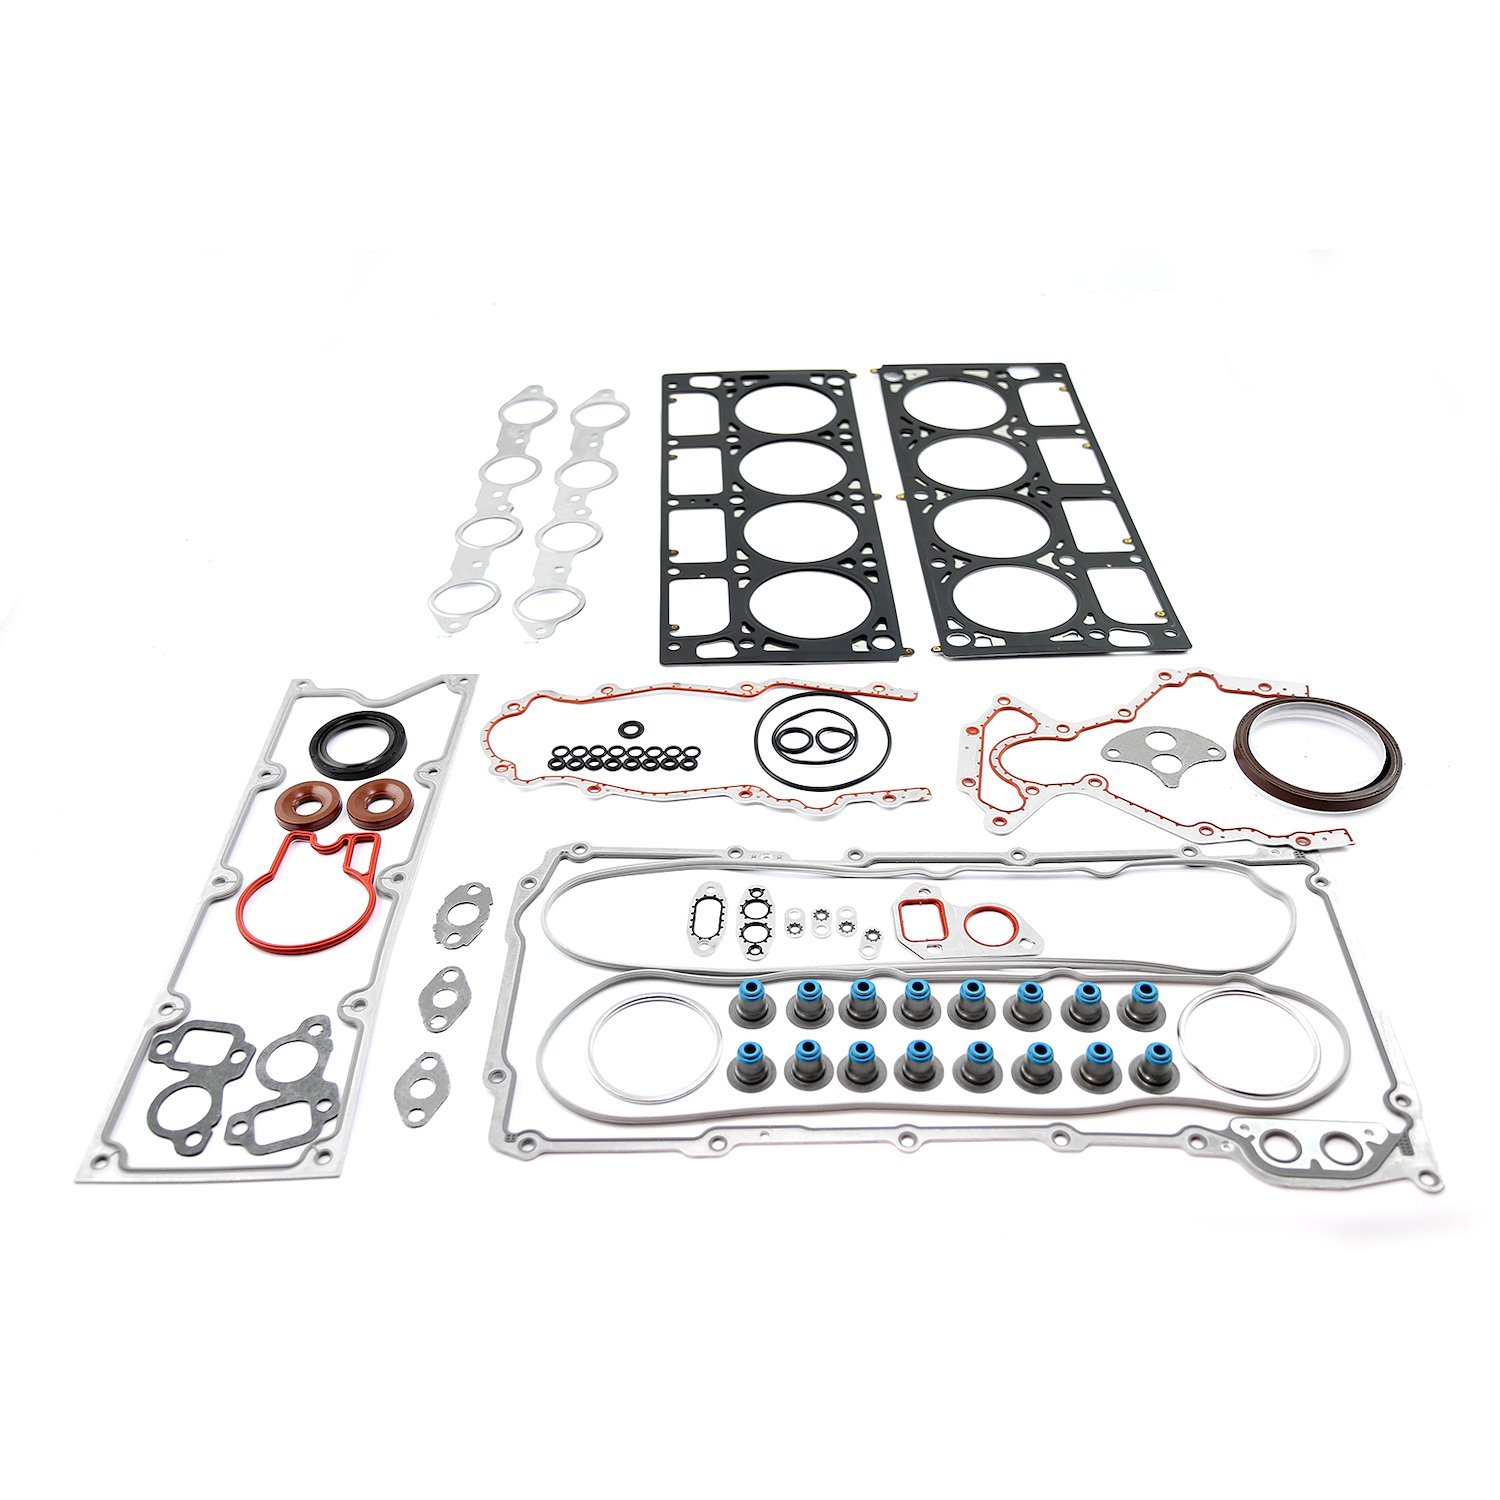 Full Engine Gasket Set for Chevy LS7